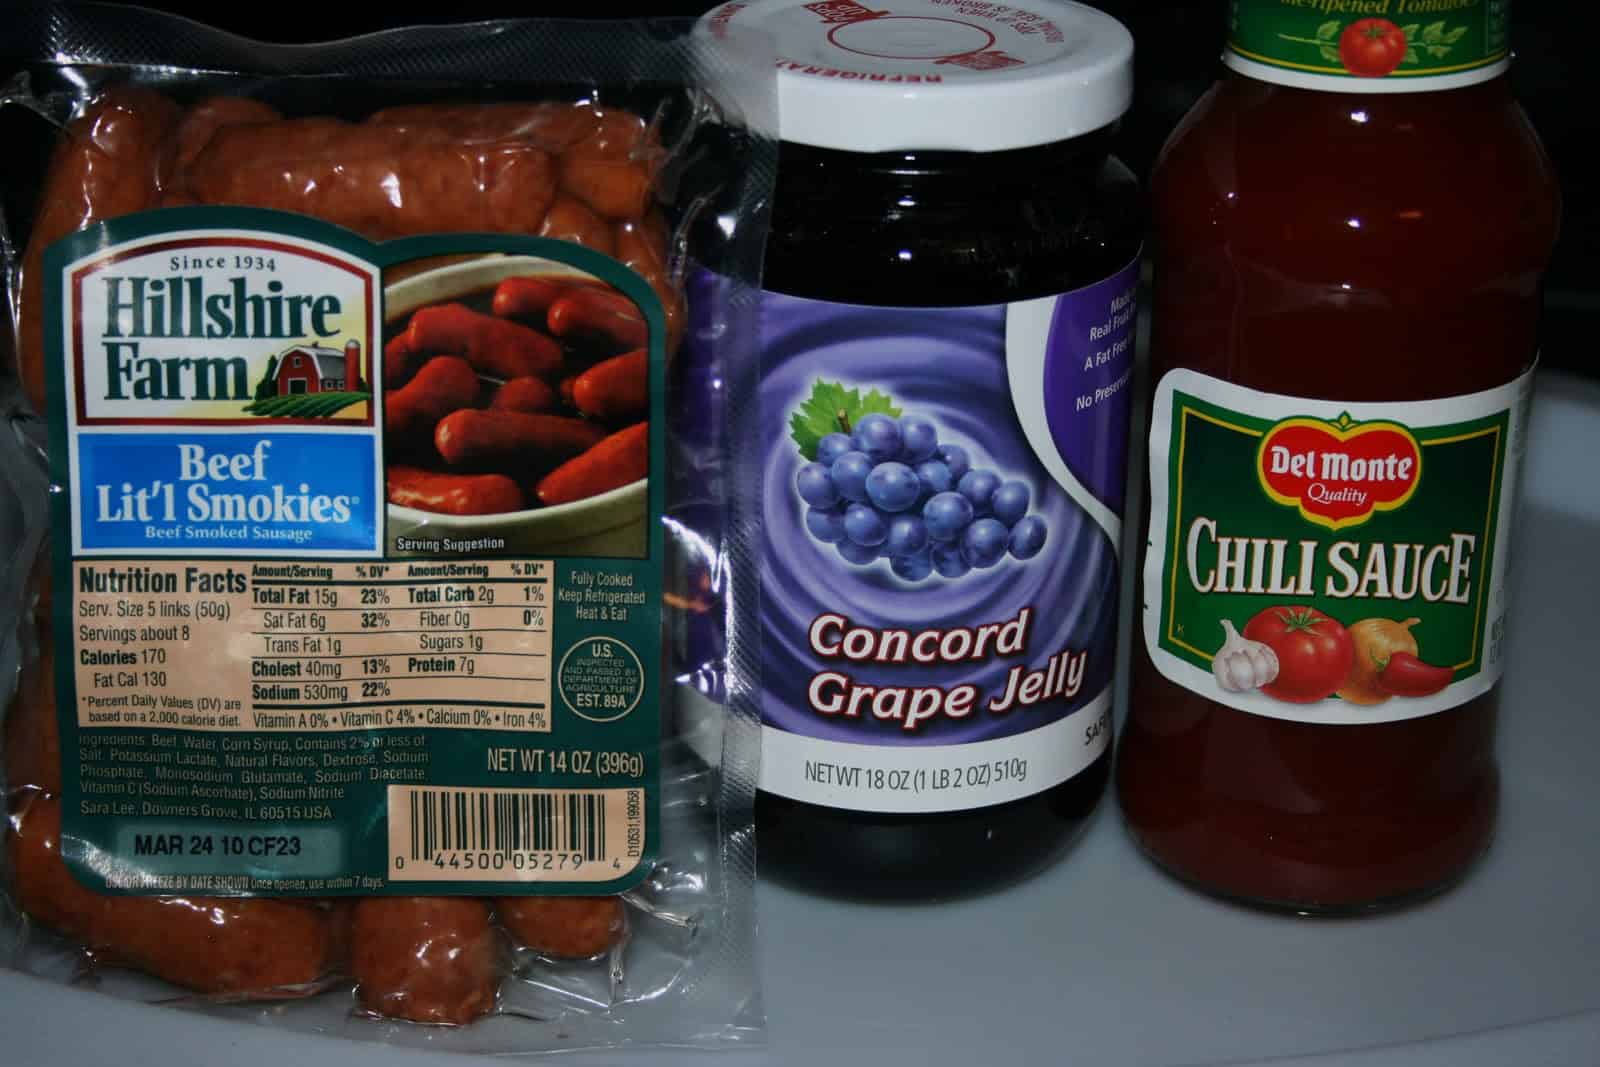 Mini smoked sausages in grape jelly and chili sauce